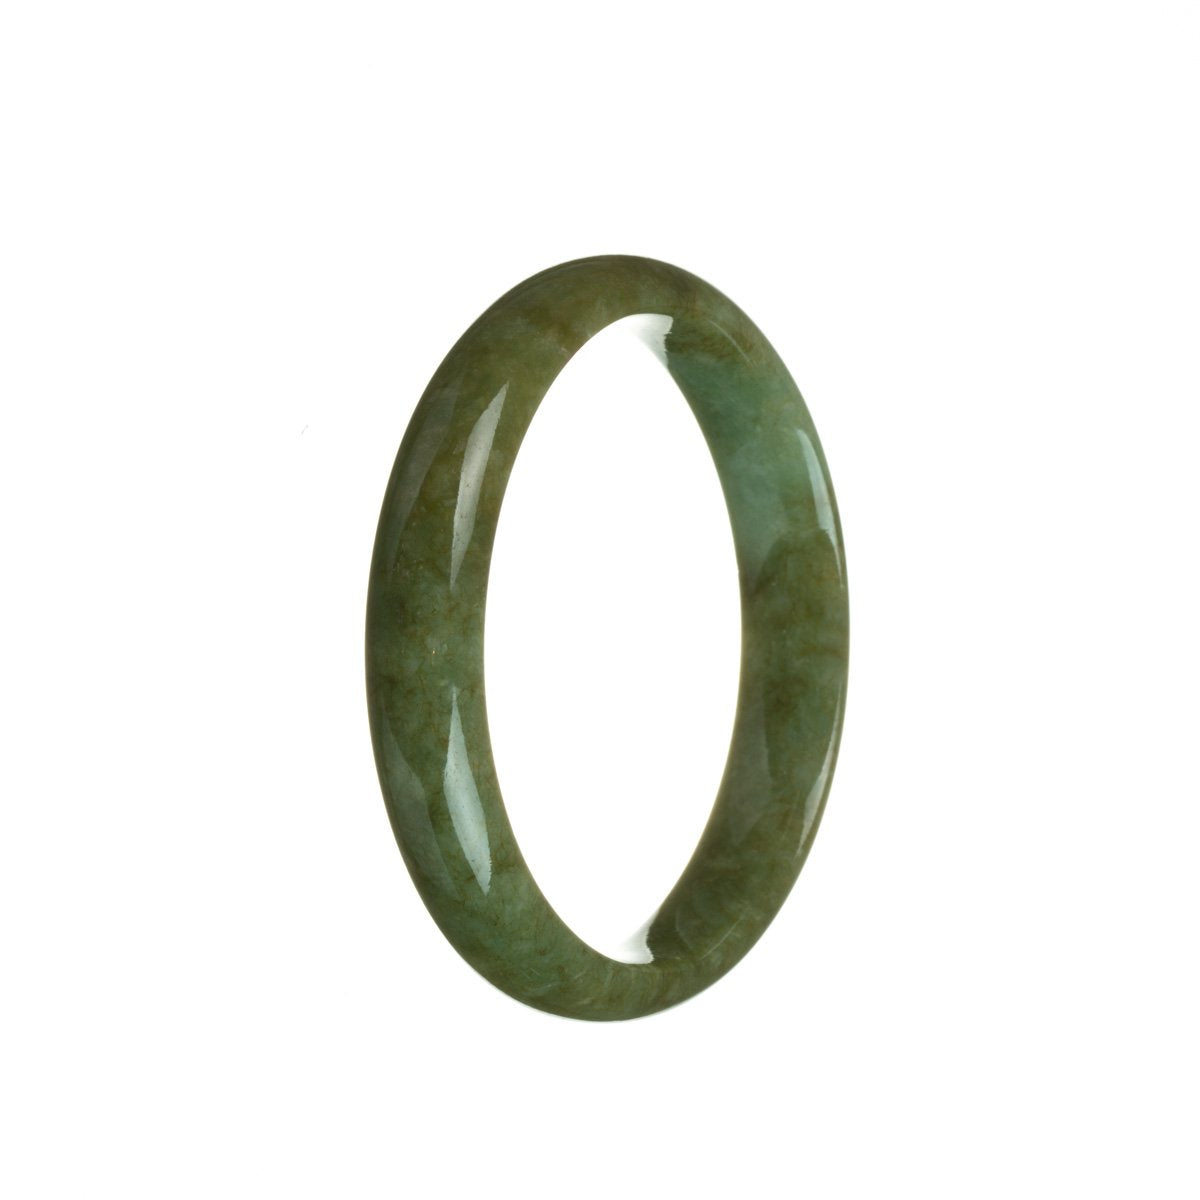 A close-up image of a real grade A brownish green jade bangle bracelet. It features a half-moon shape and has a diameter of 57mm. This bracelet is from the brand MAYS.